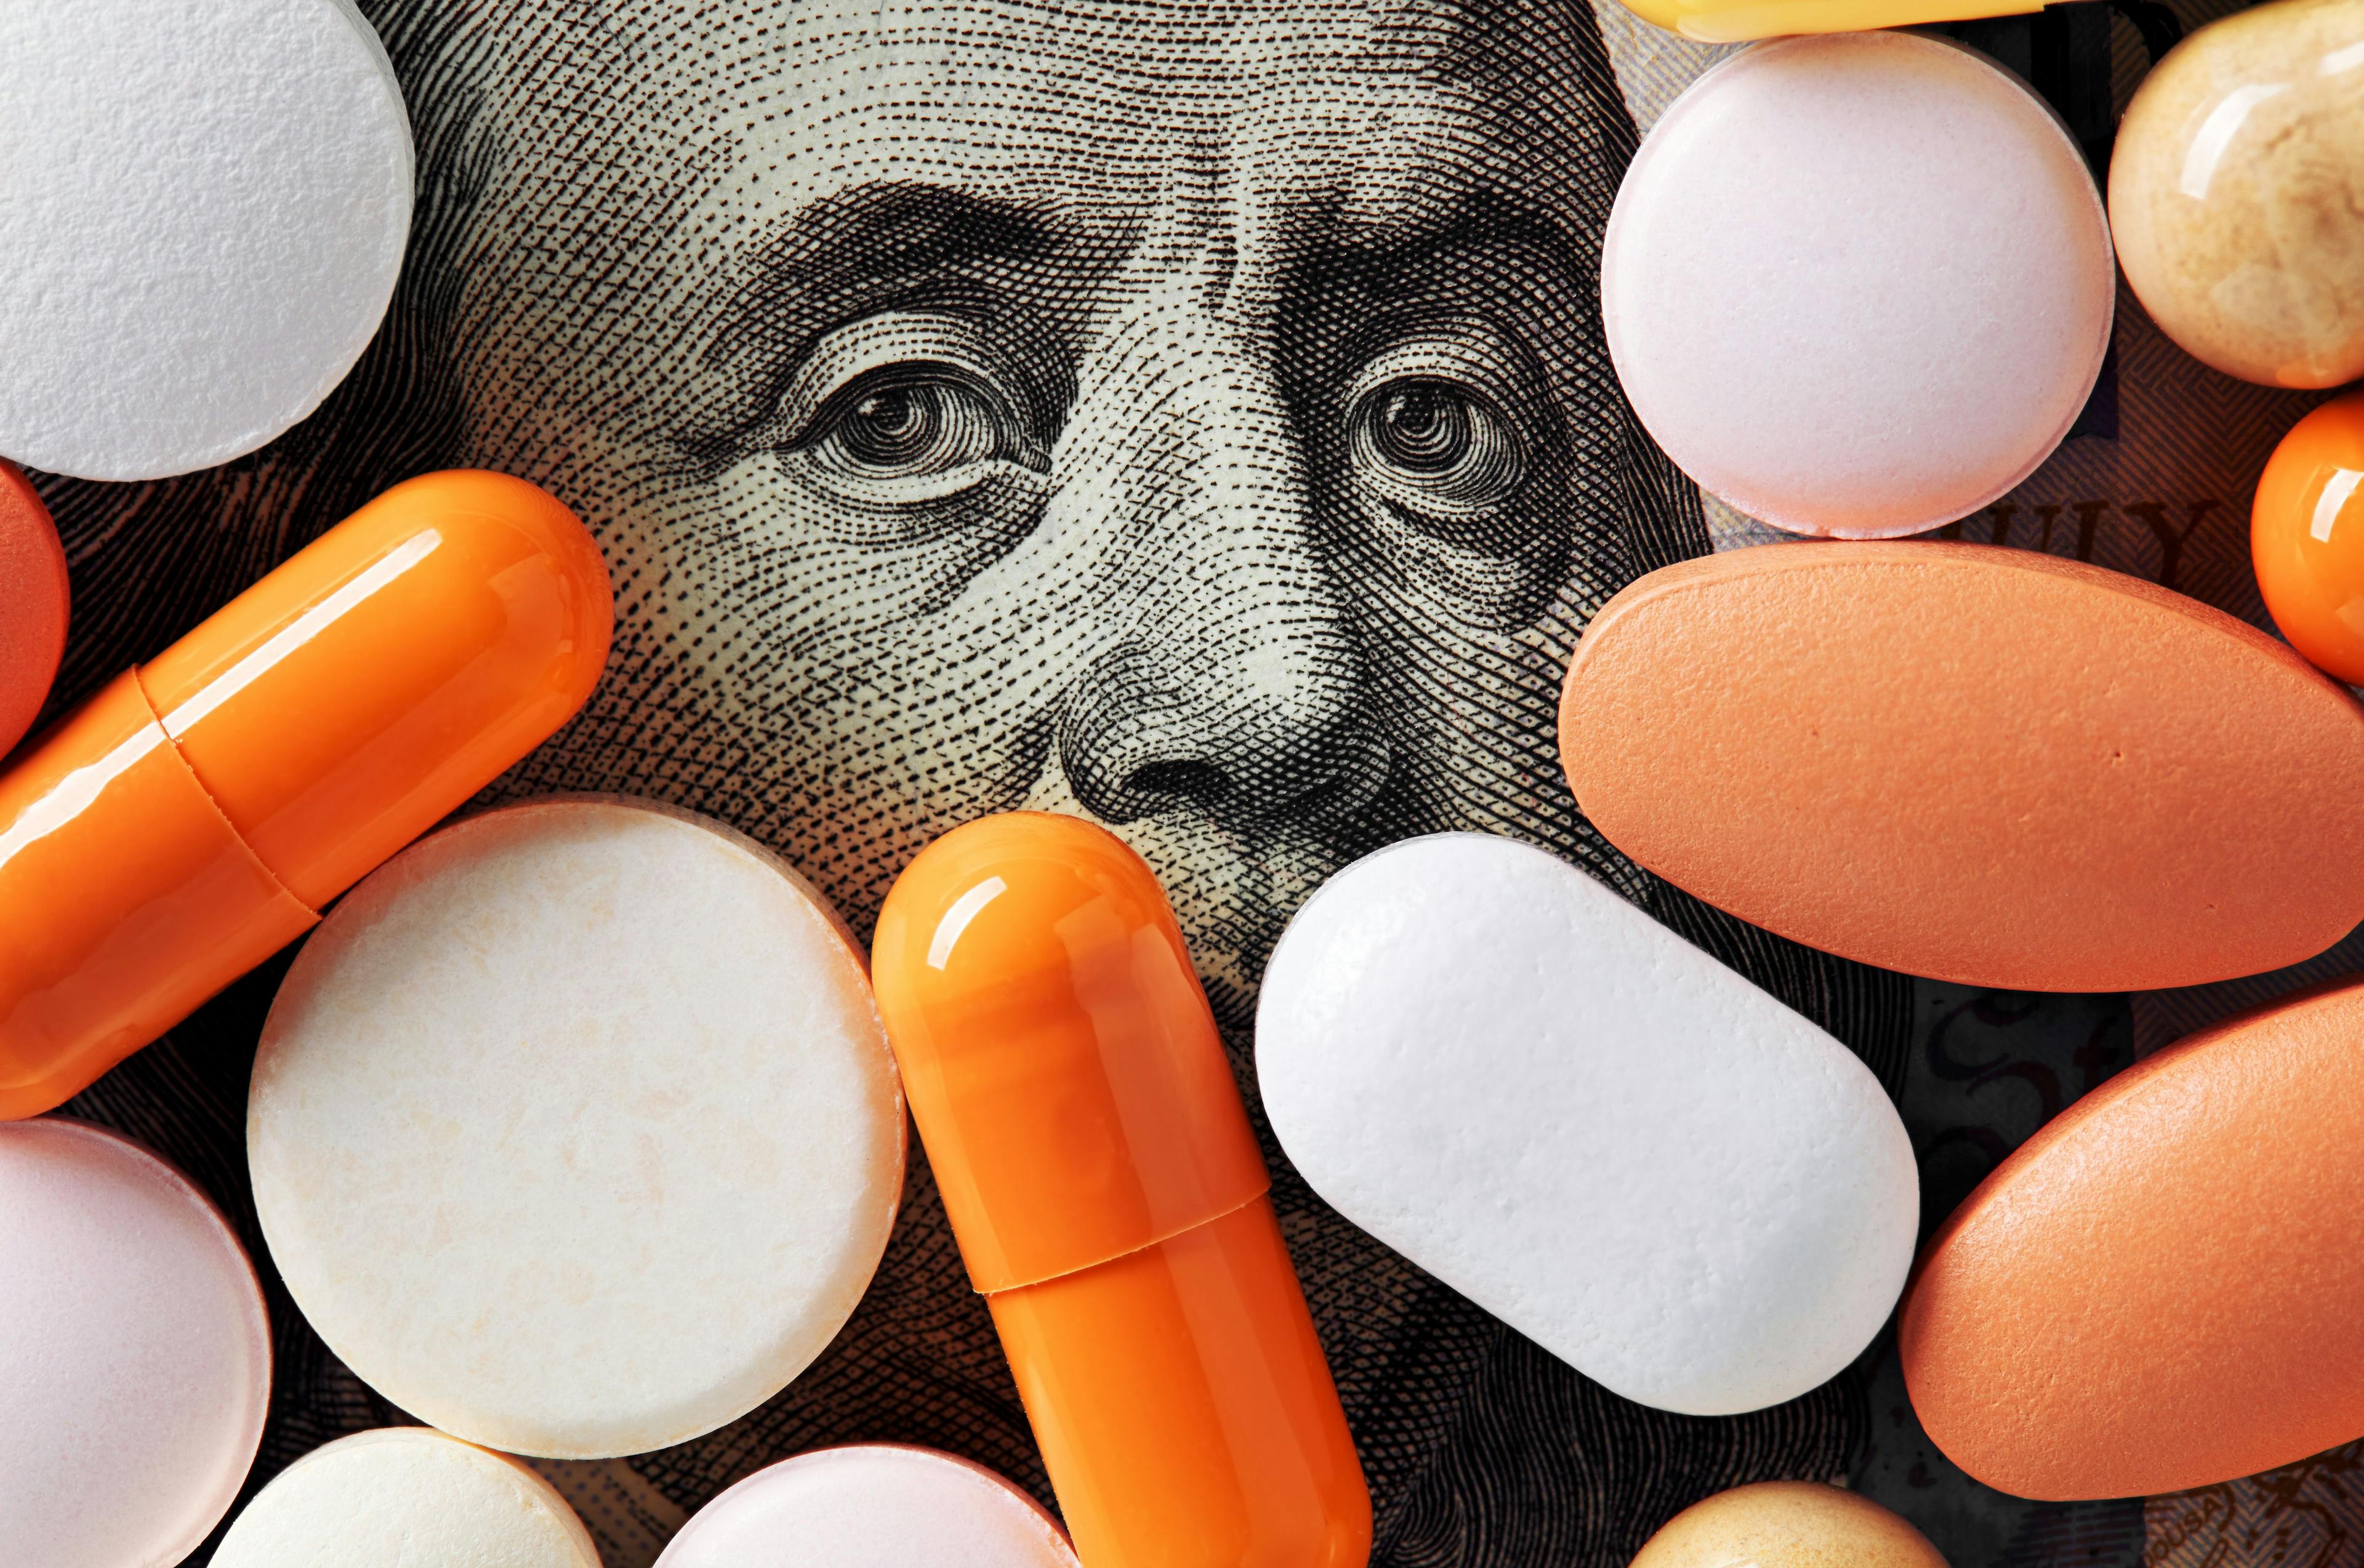 Capitalism and health care policy concept | Image credit: See Less - stock.adobe.com